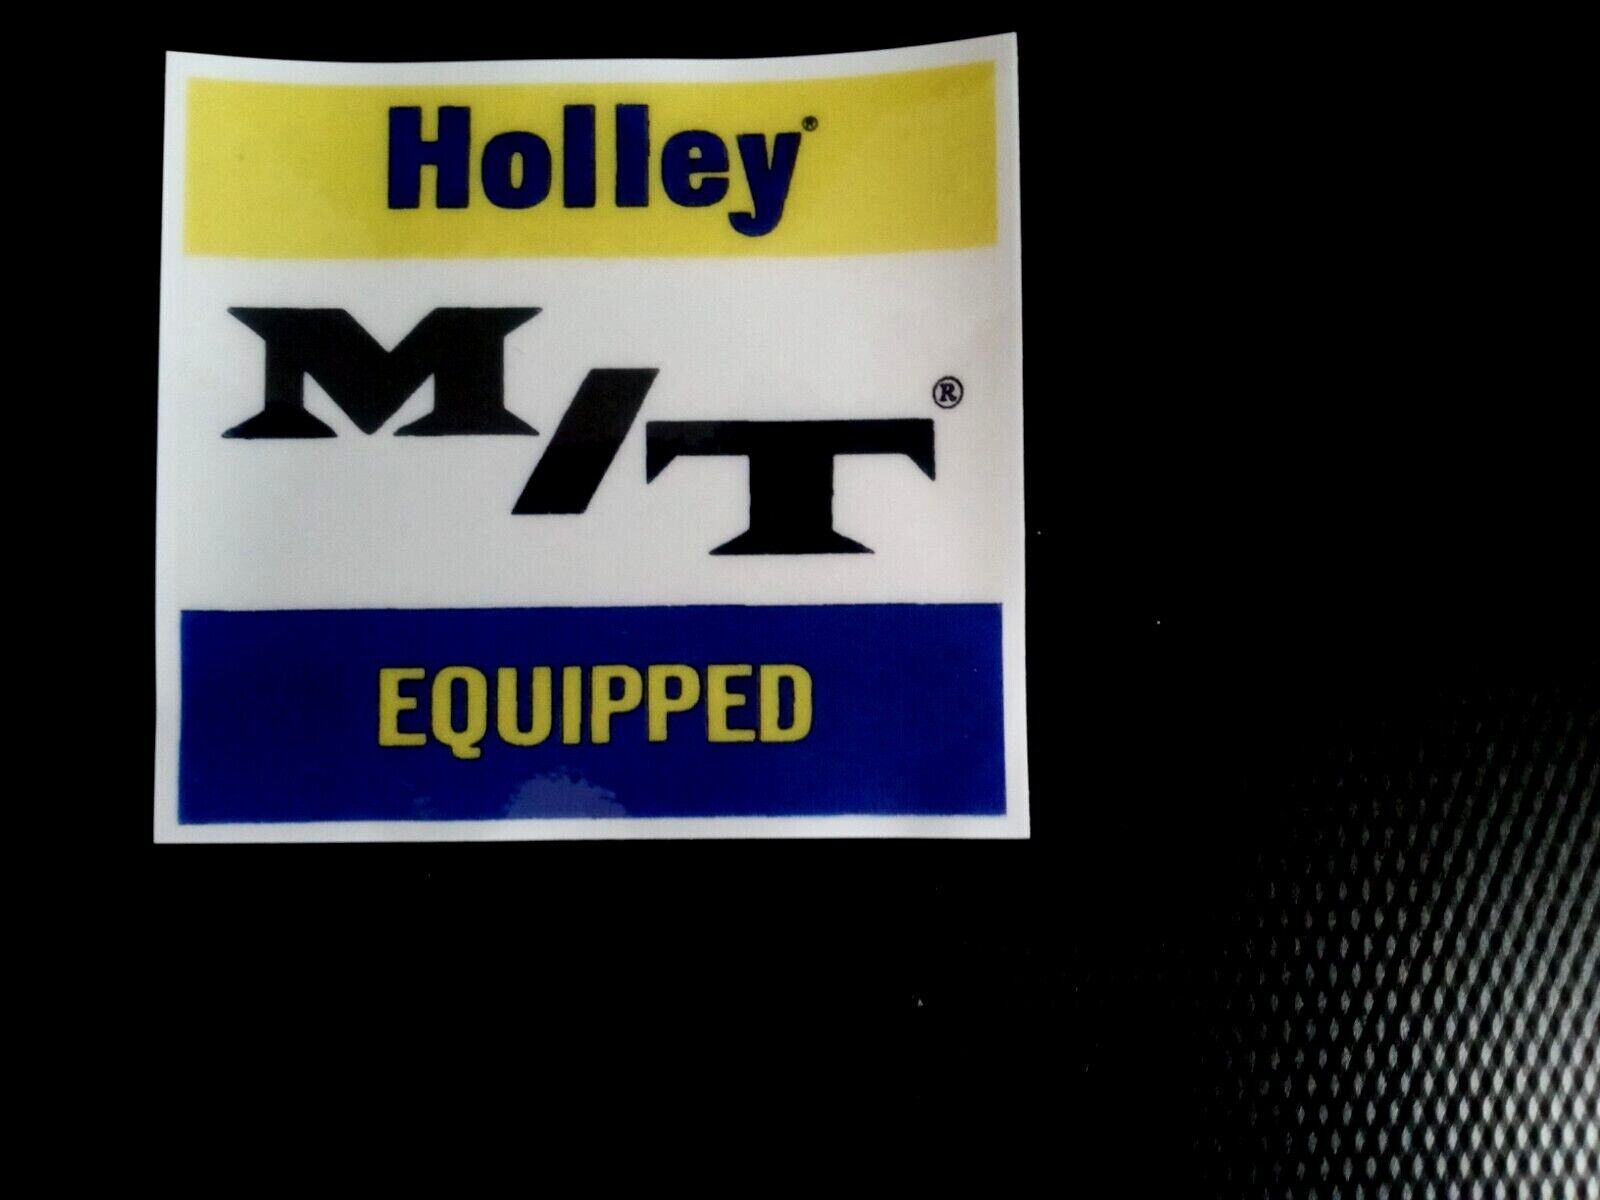 Vintage Holley M/T Equipped Products. When you buy (2) you can save 